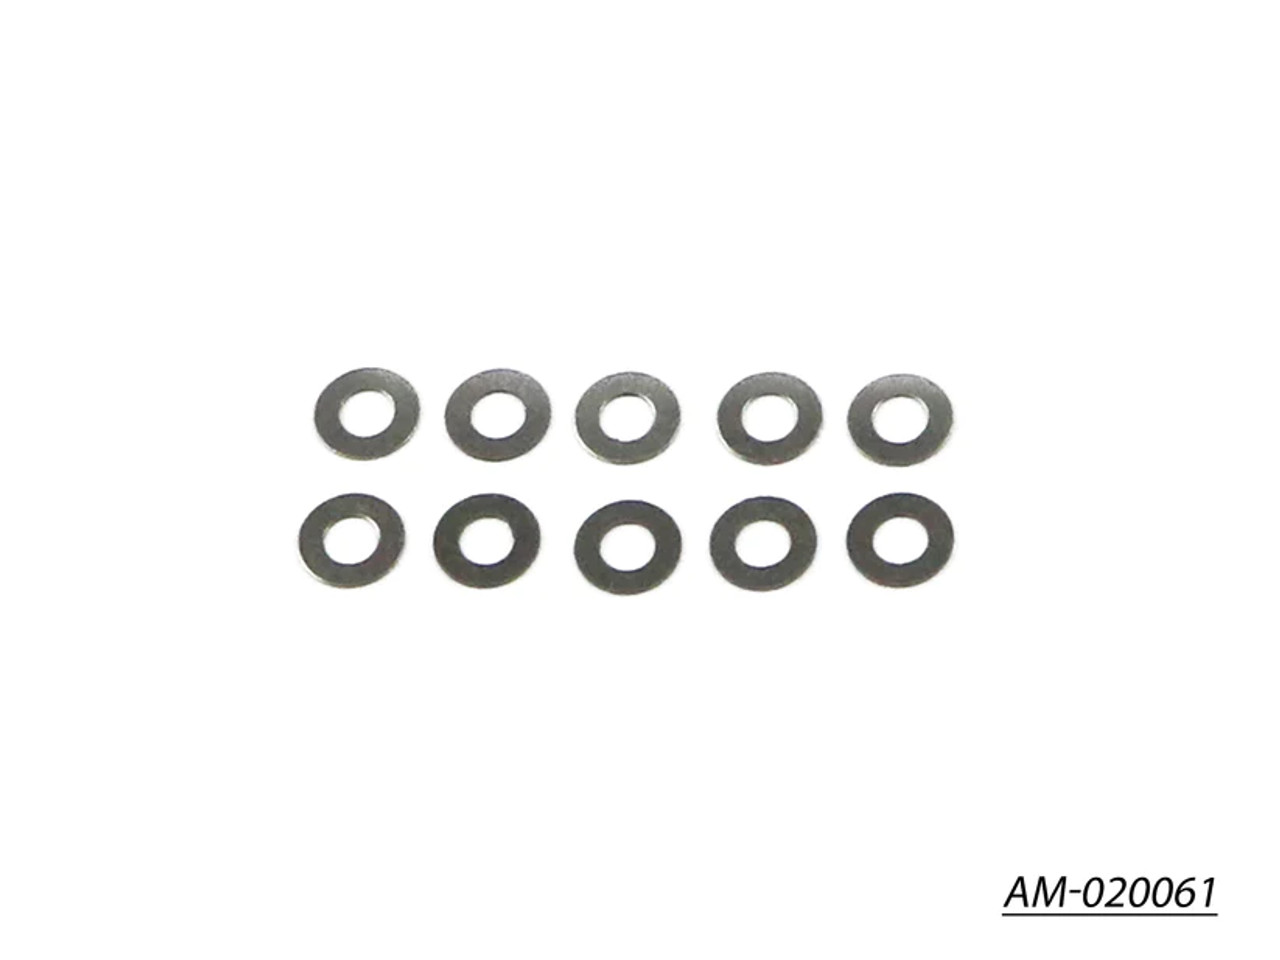 ArrowMax Stainless Steel Shims 3 x 6 x 0.1 (10)